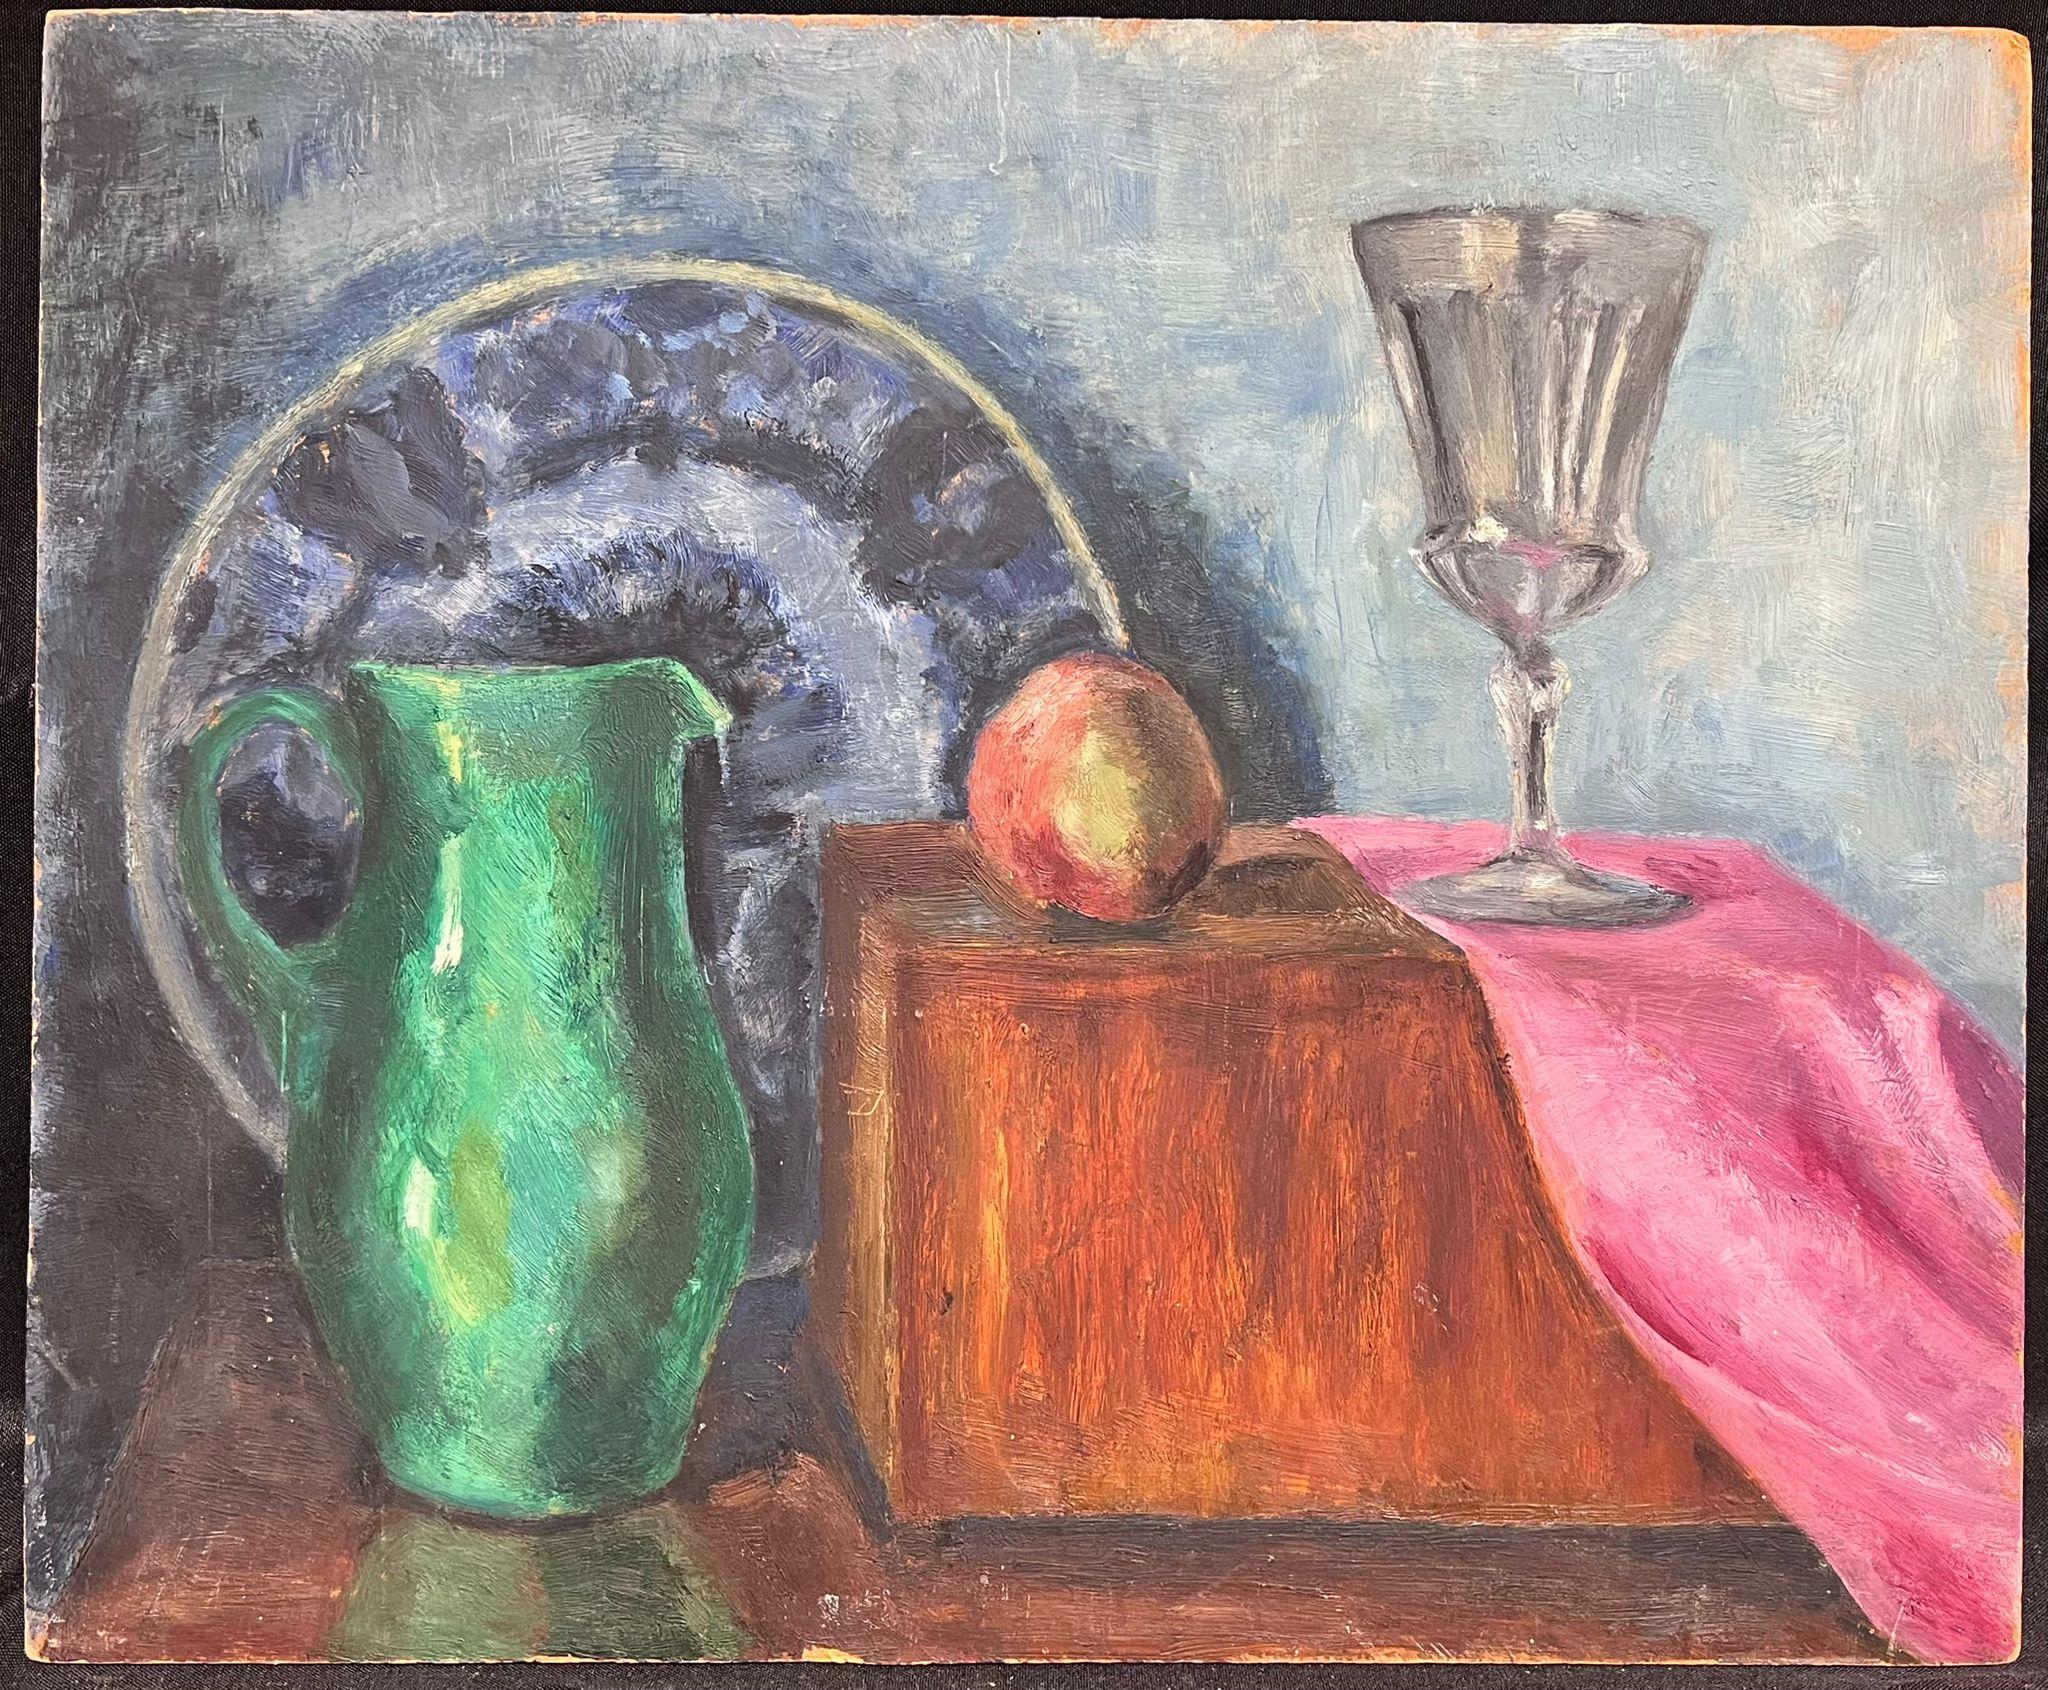 Mid 20th Century French Modernist Still Life of Objects  - Painting by GENEVIEVE ZONDERVAN (1922-2013)